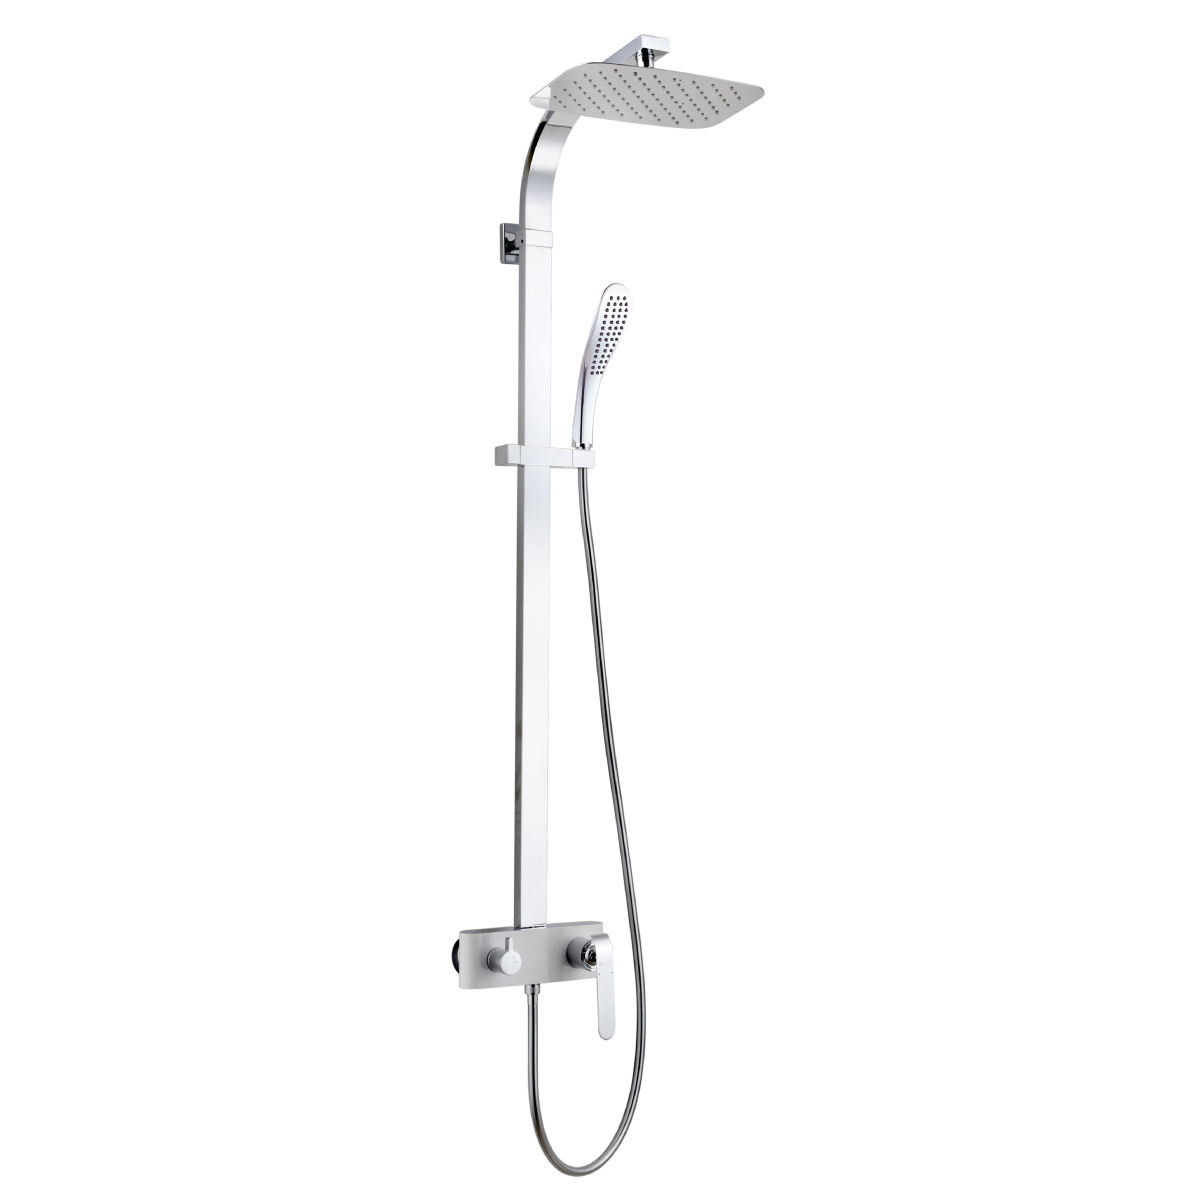 LM4960CW Shower faucet with non-adjustable rod height and «Tropical rain» shower head